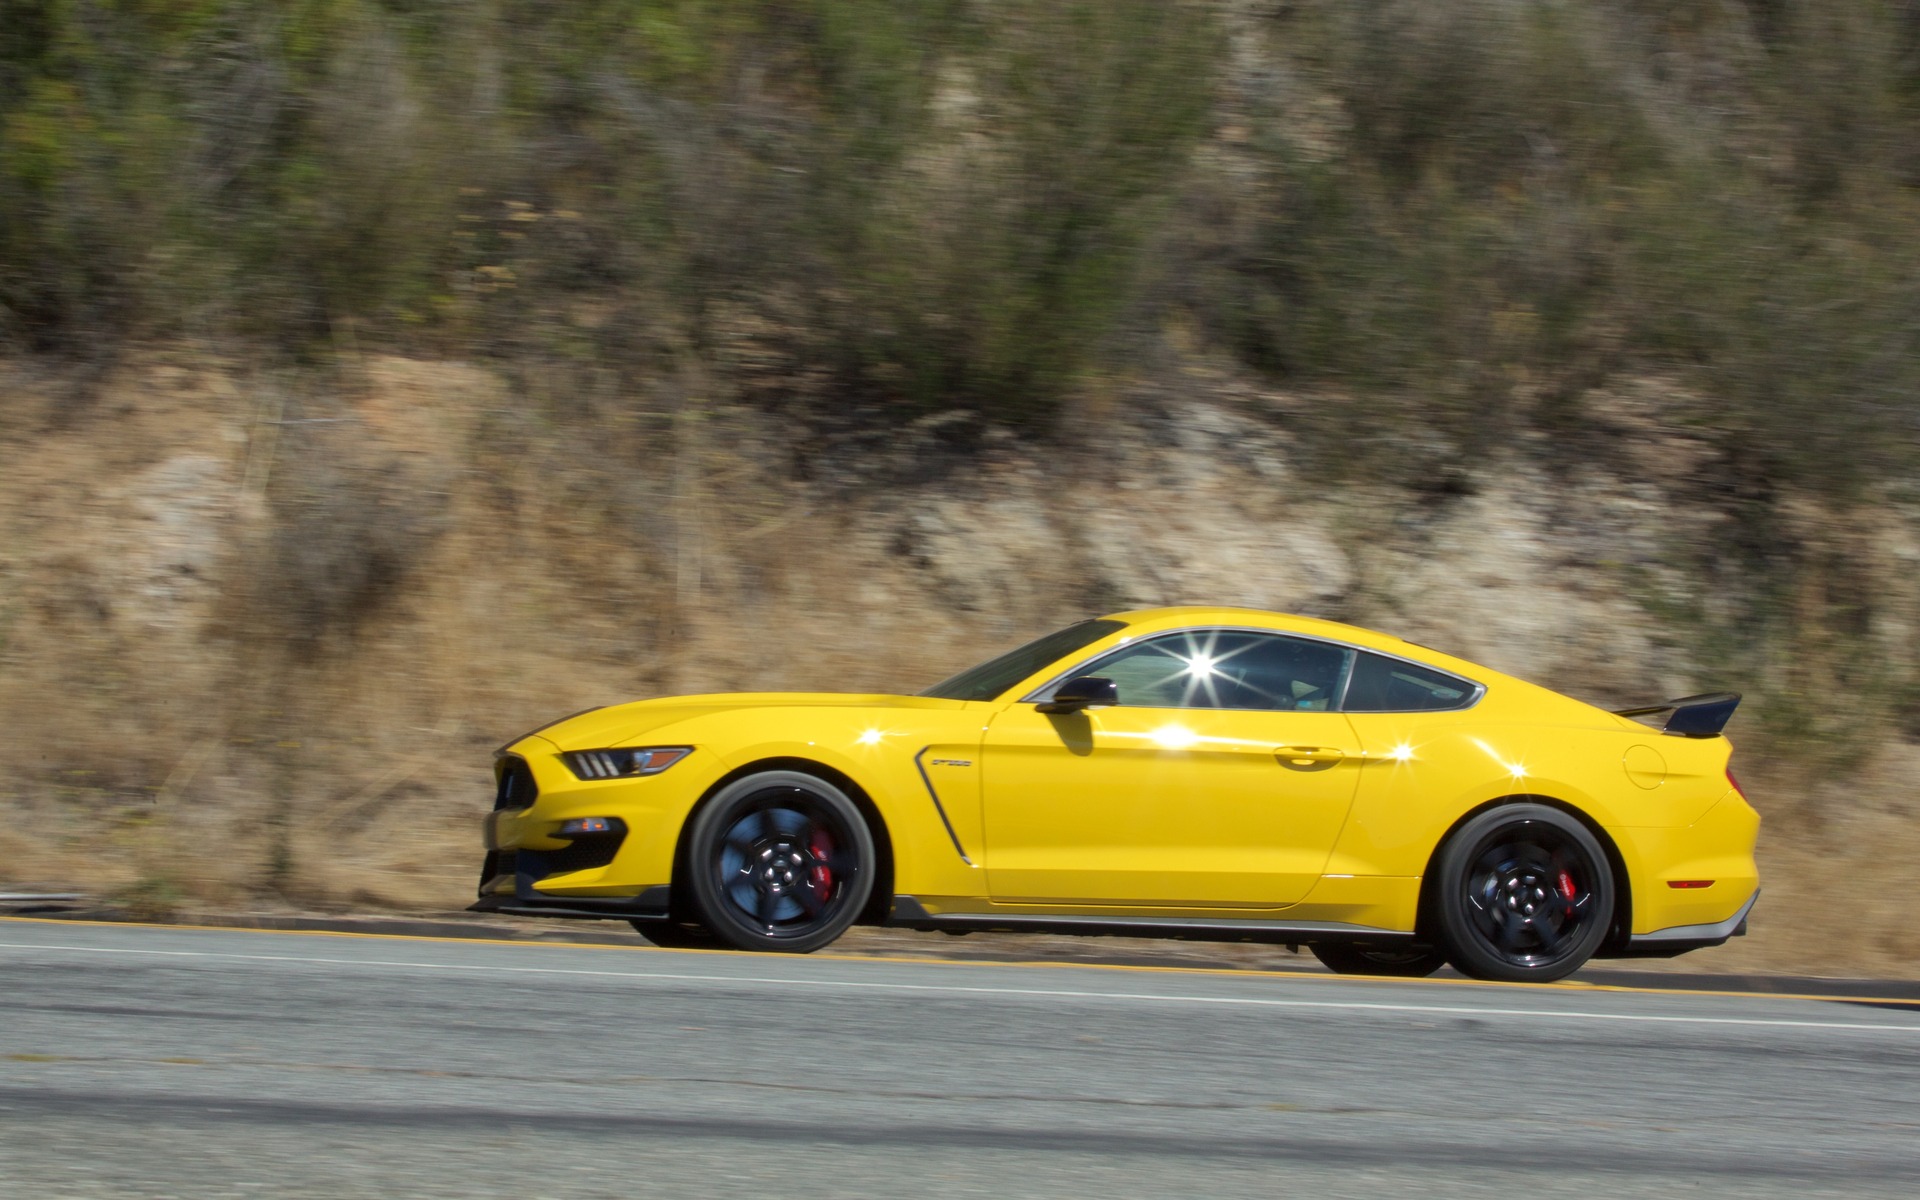 2017 Ford Mustang Prices, Reviews, and Photos - MotorTrend